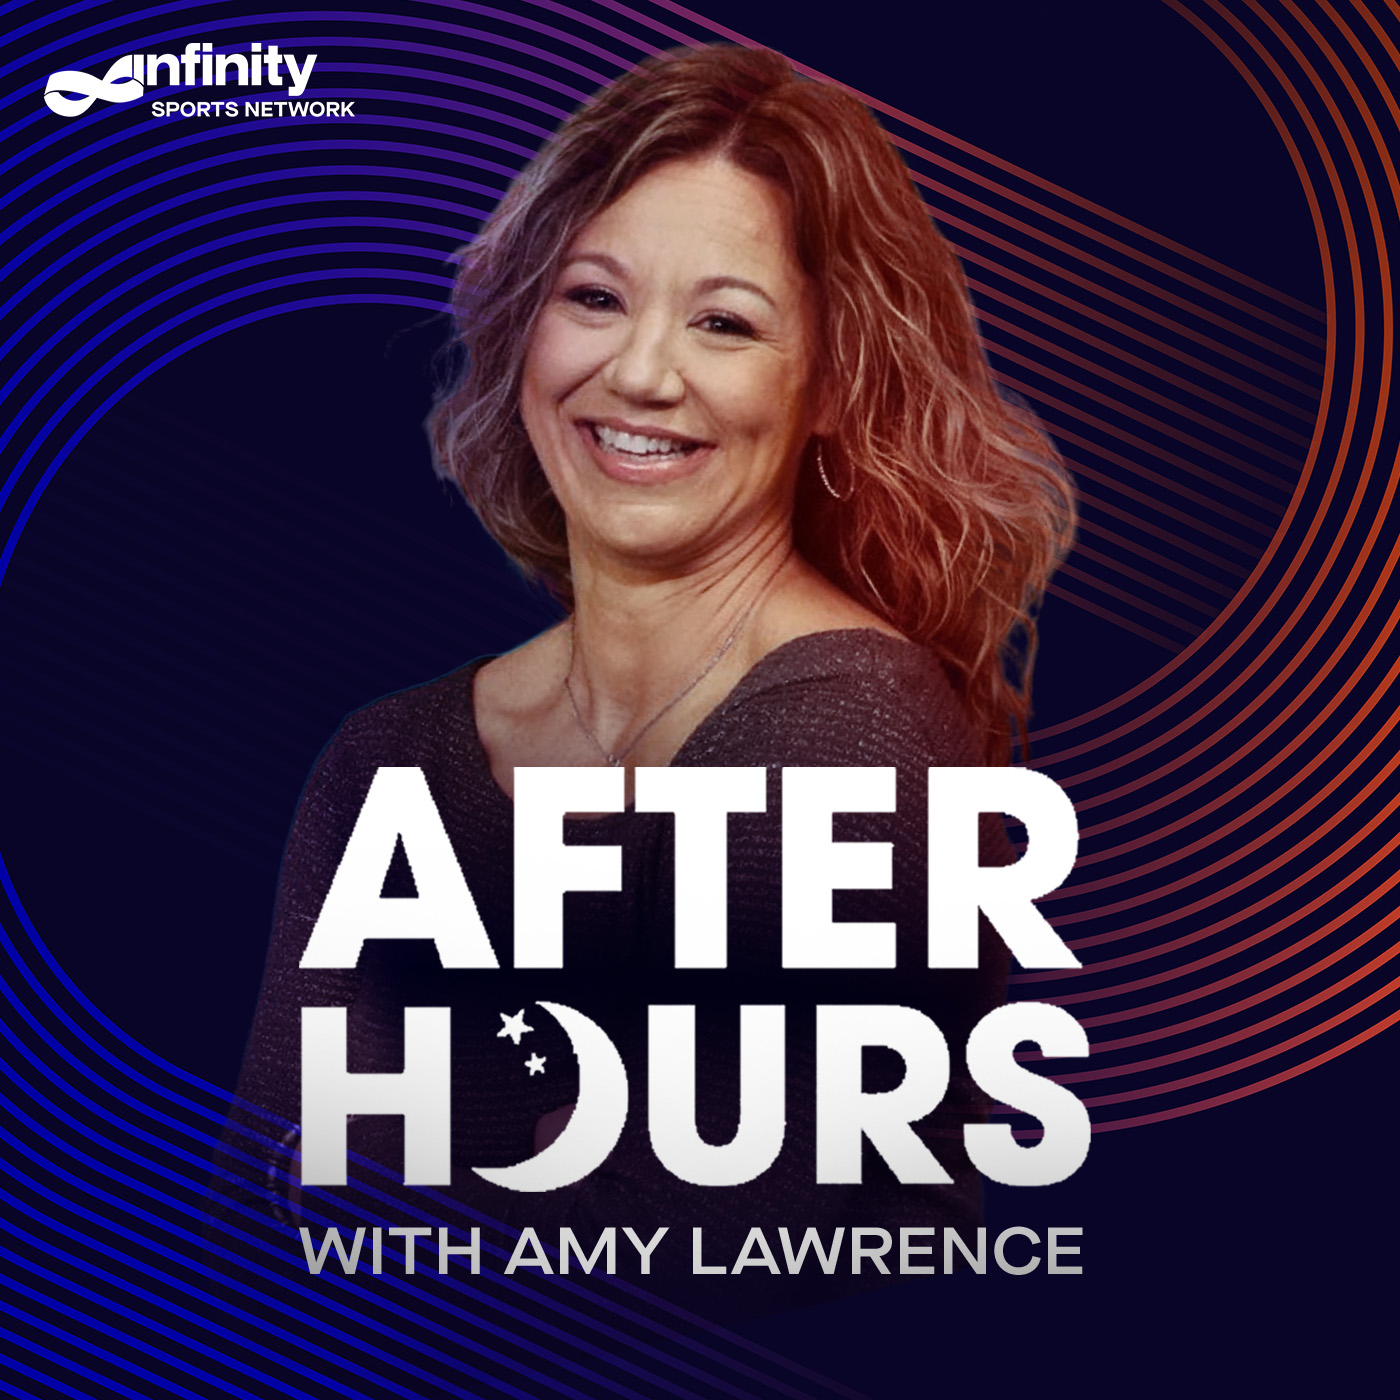 1-12-22 After Hours with Amy Lawrence PODCAST: Hour 4